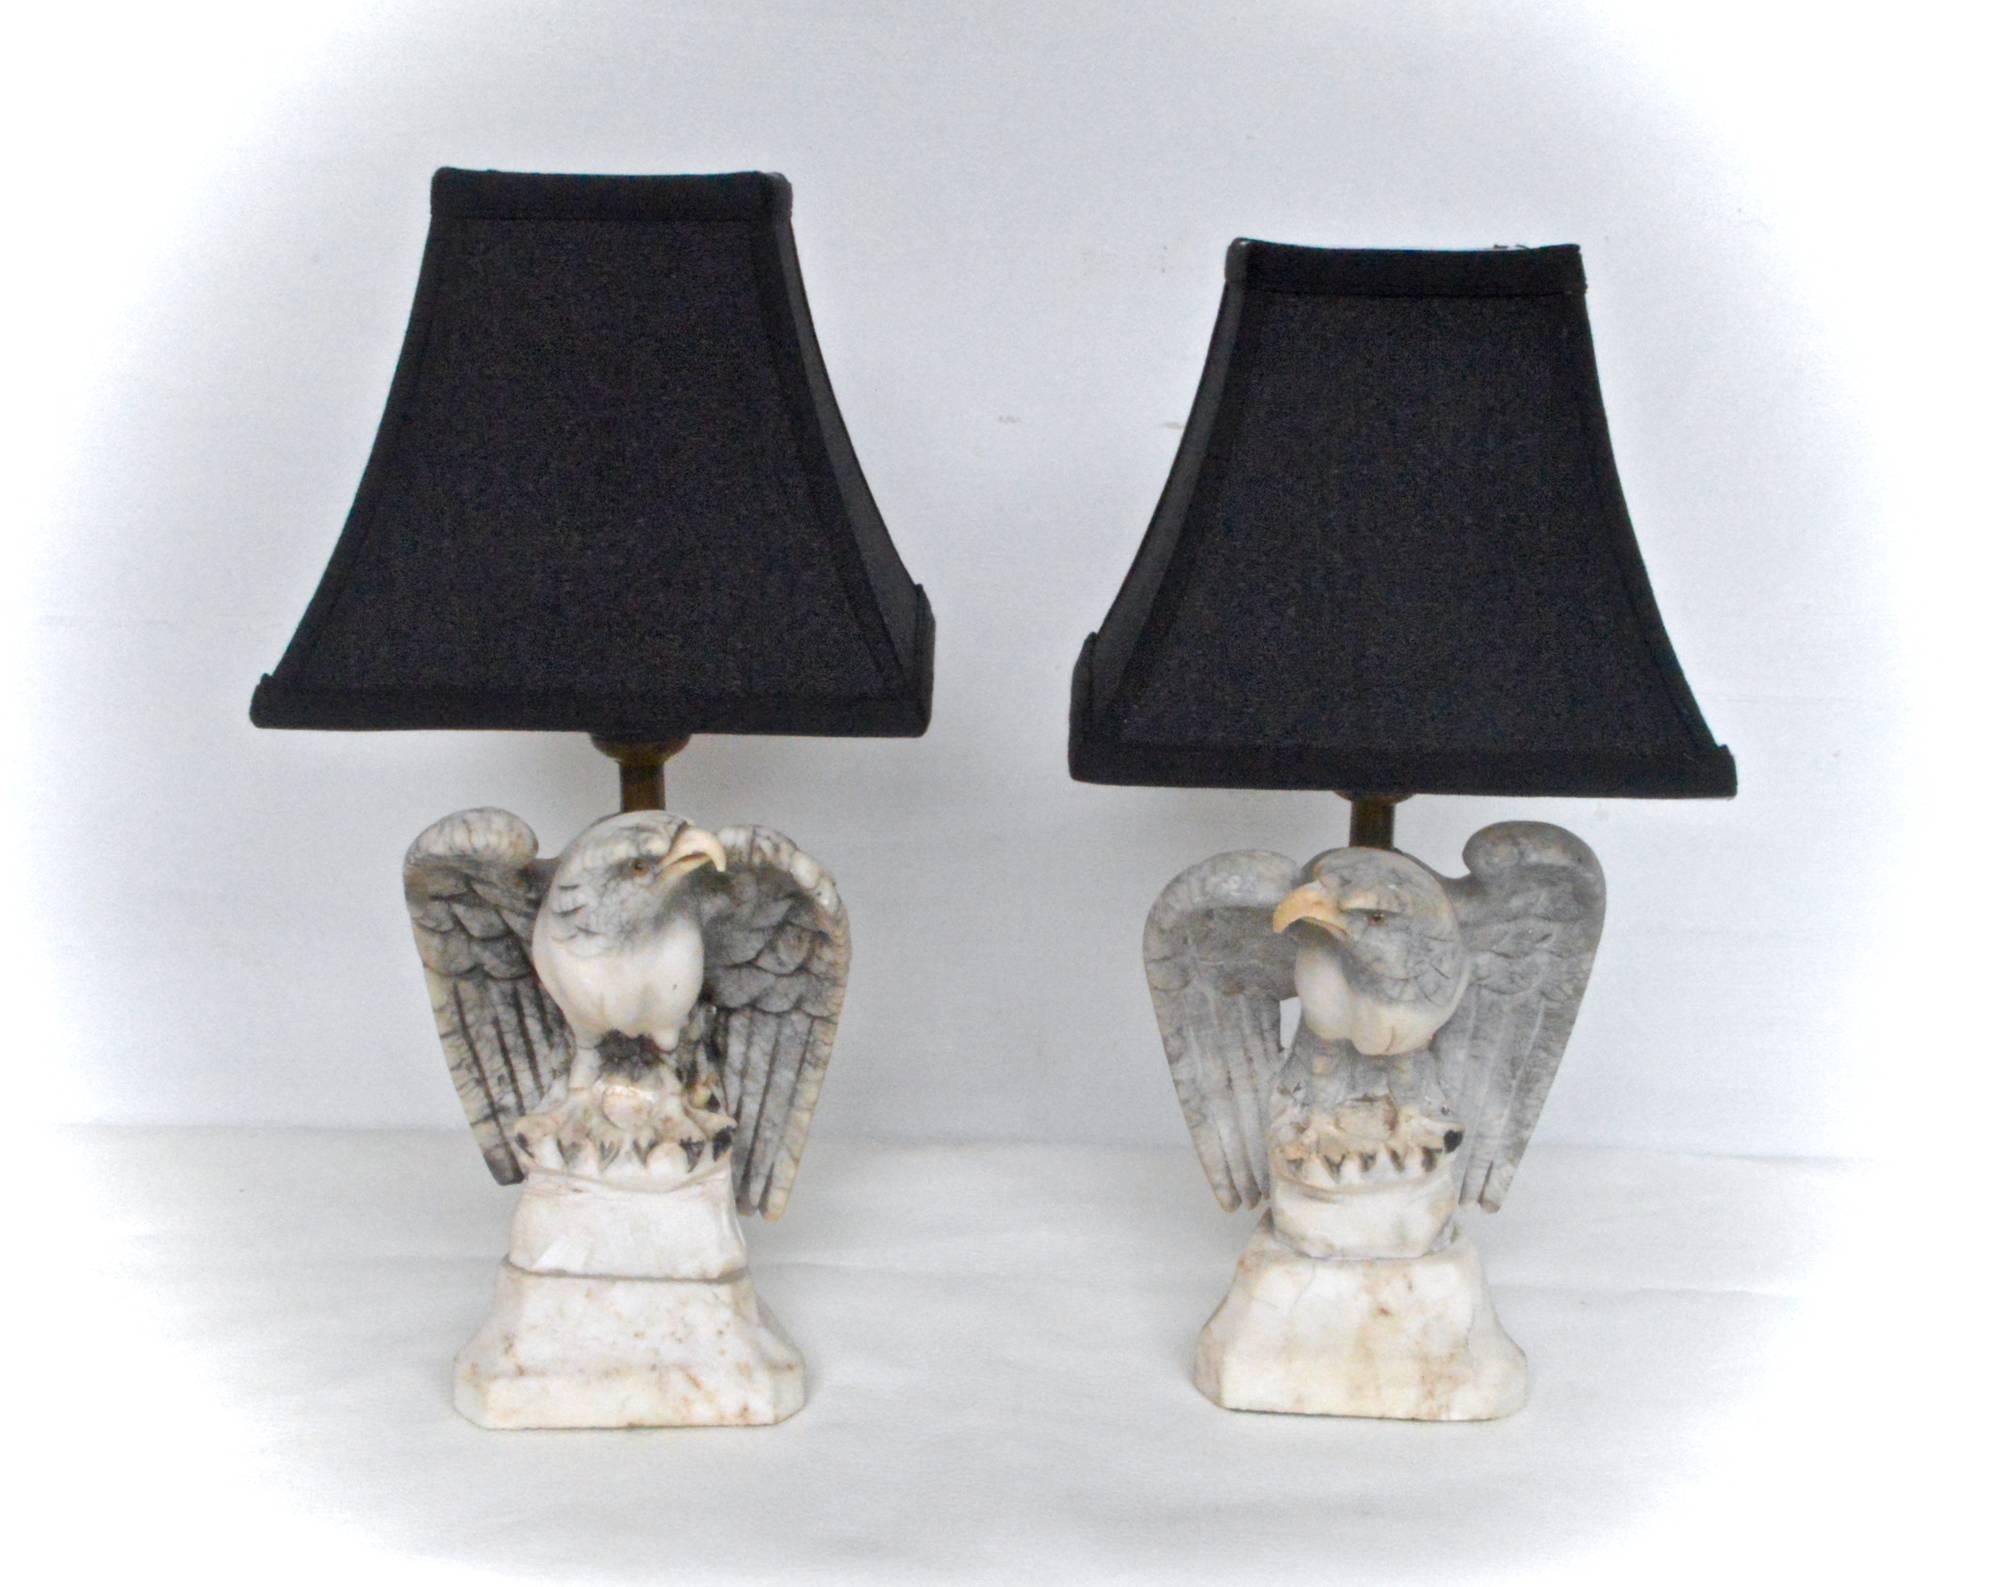 A near pair of carved marble lamps depicting fierce eagles. In the Art-Deco taste, these wonderful little lamps are a stylish addition to any classically inspired decor. Rewired in brown cloth wrapped cords, lamps sell and ship with the pictured